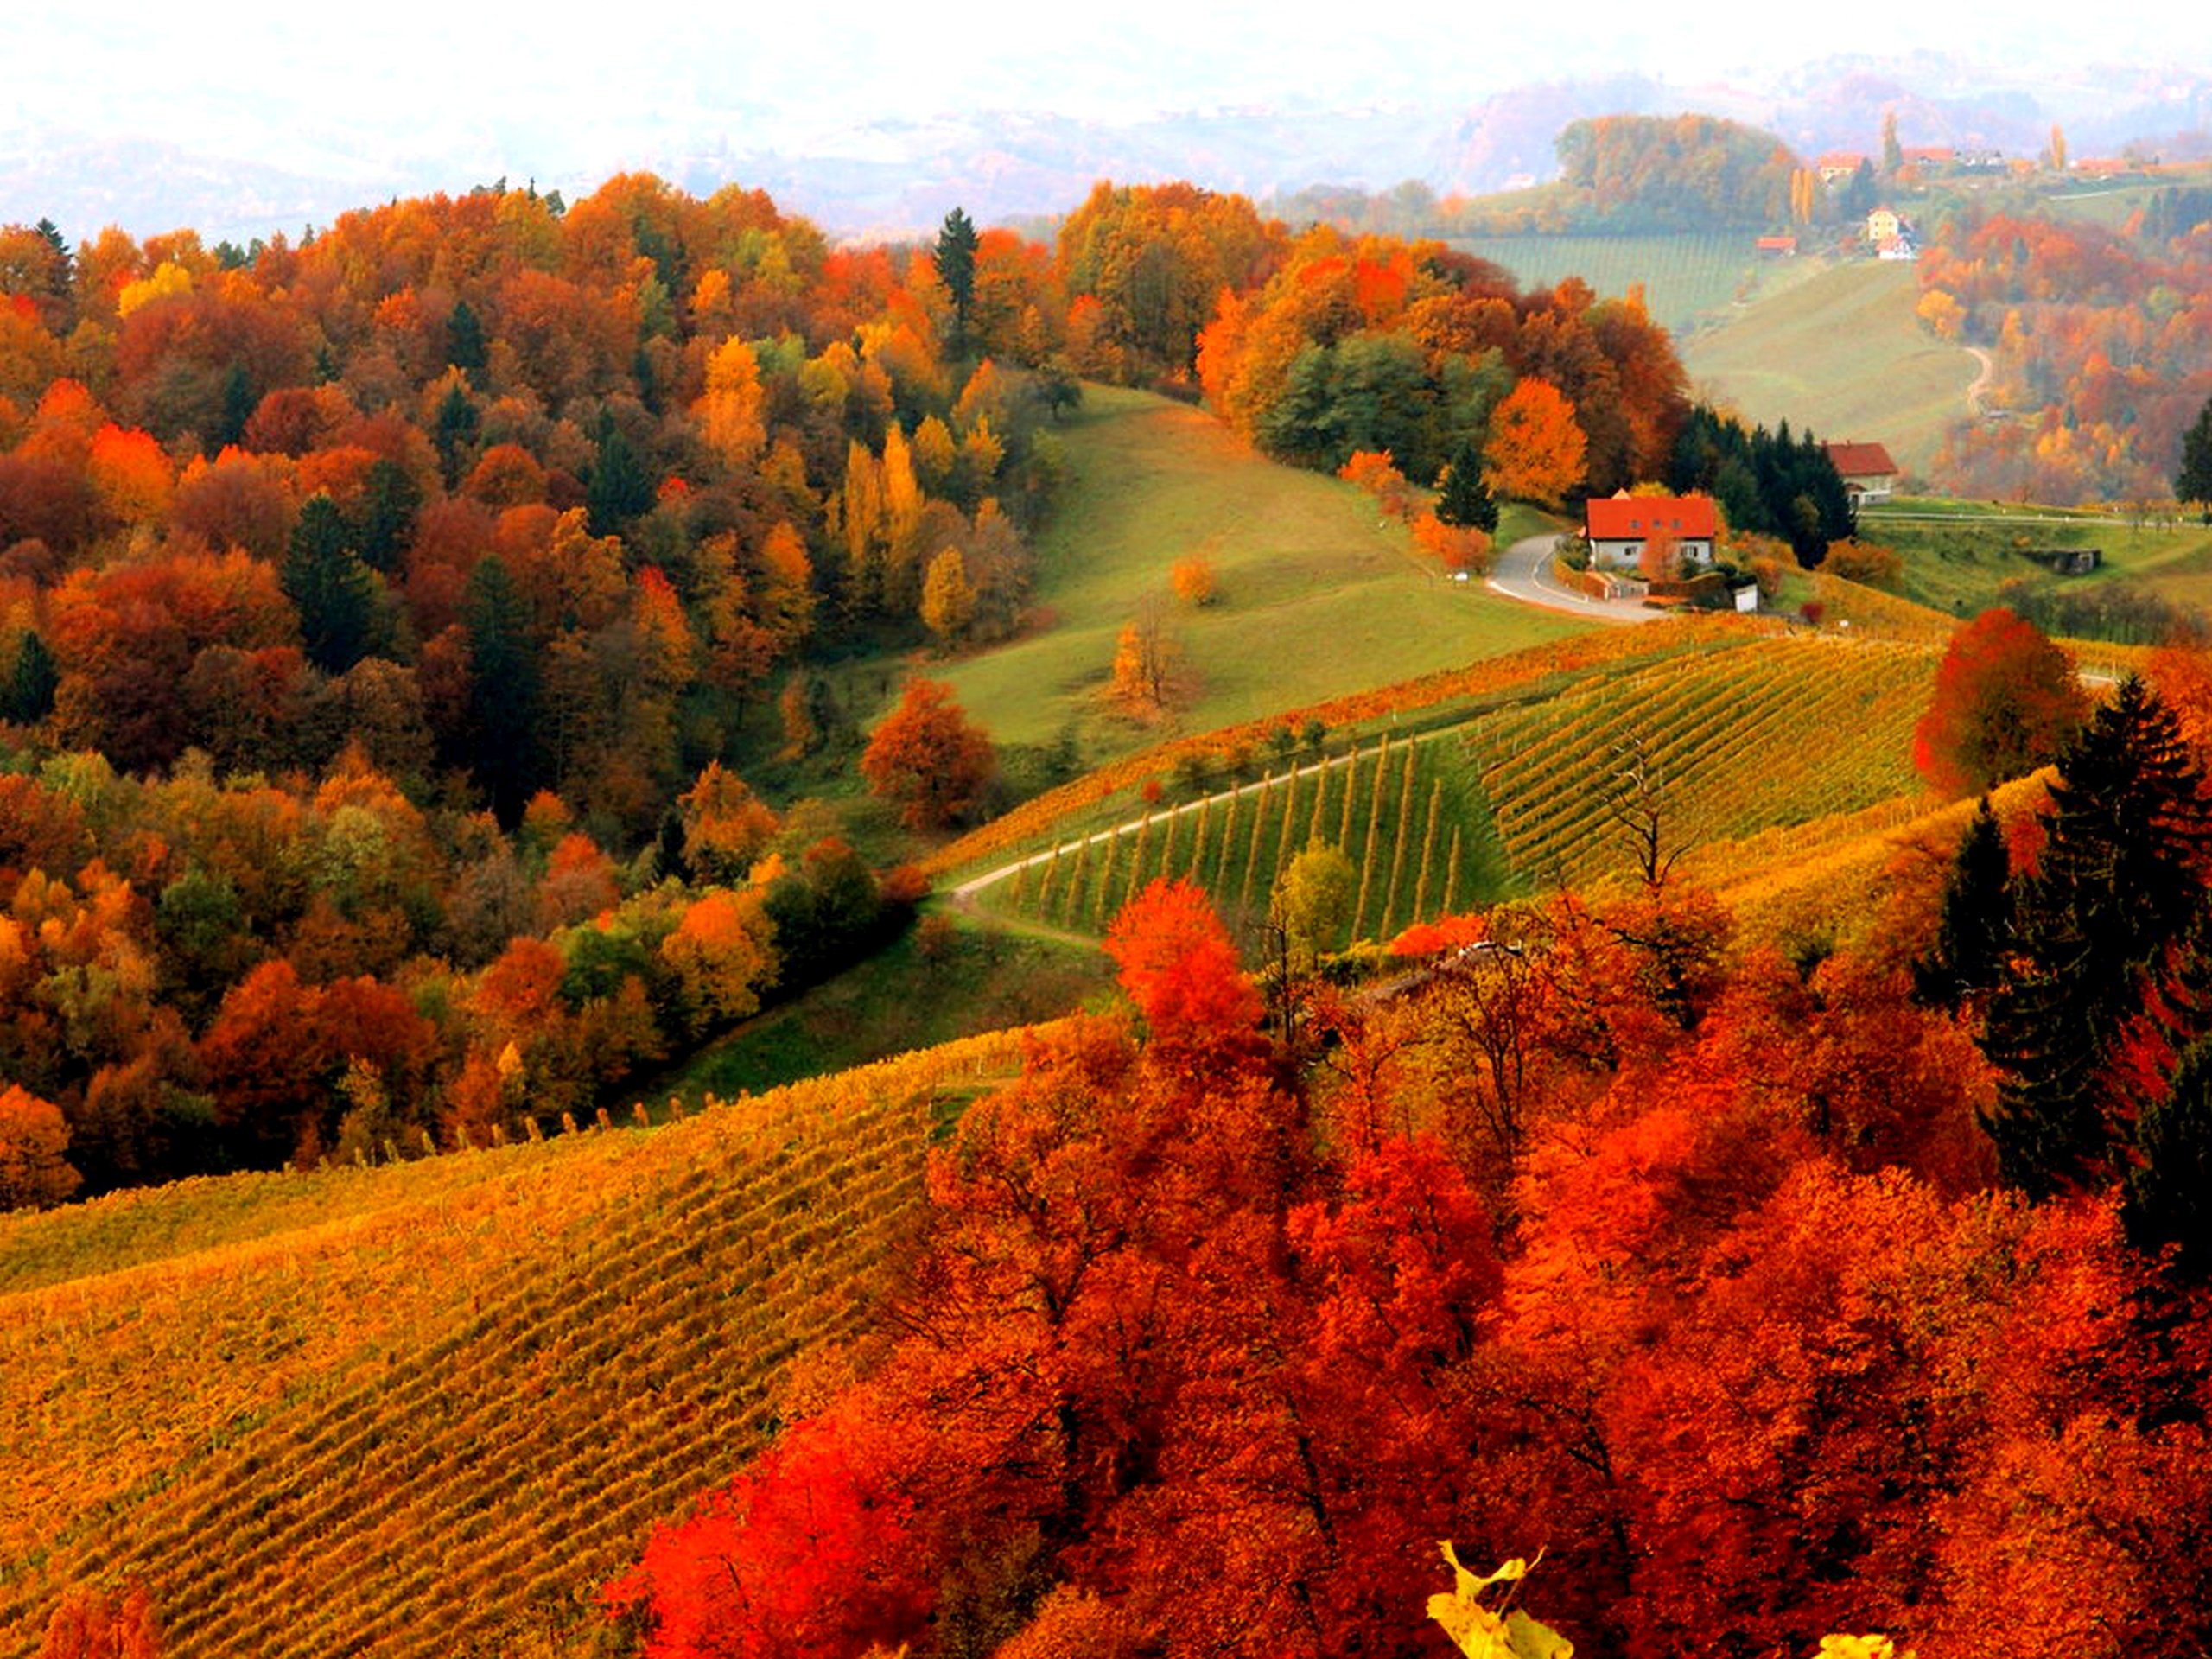 houses, Foliage, Fall, Autumn, Mountain, View, Lovely, Hills, Beautiful, Trees, Village, Peaceful Wallpaper